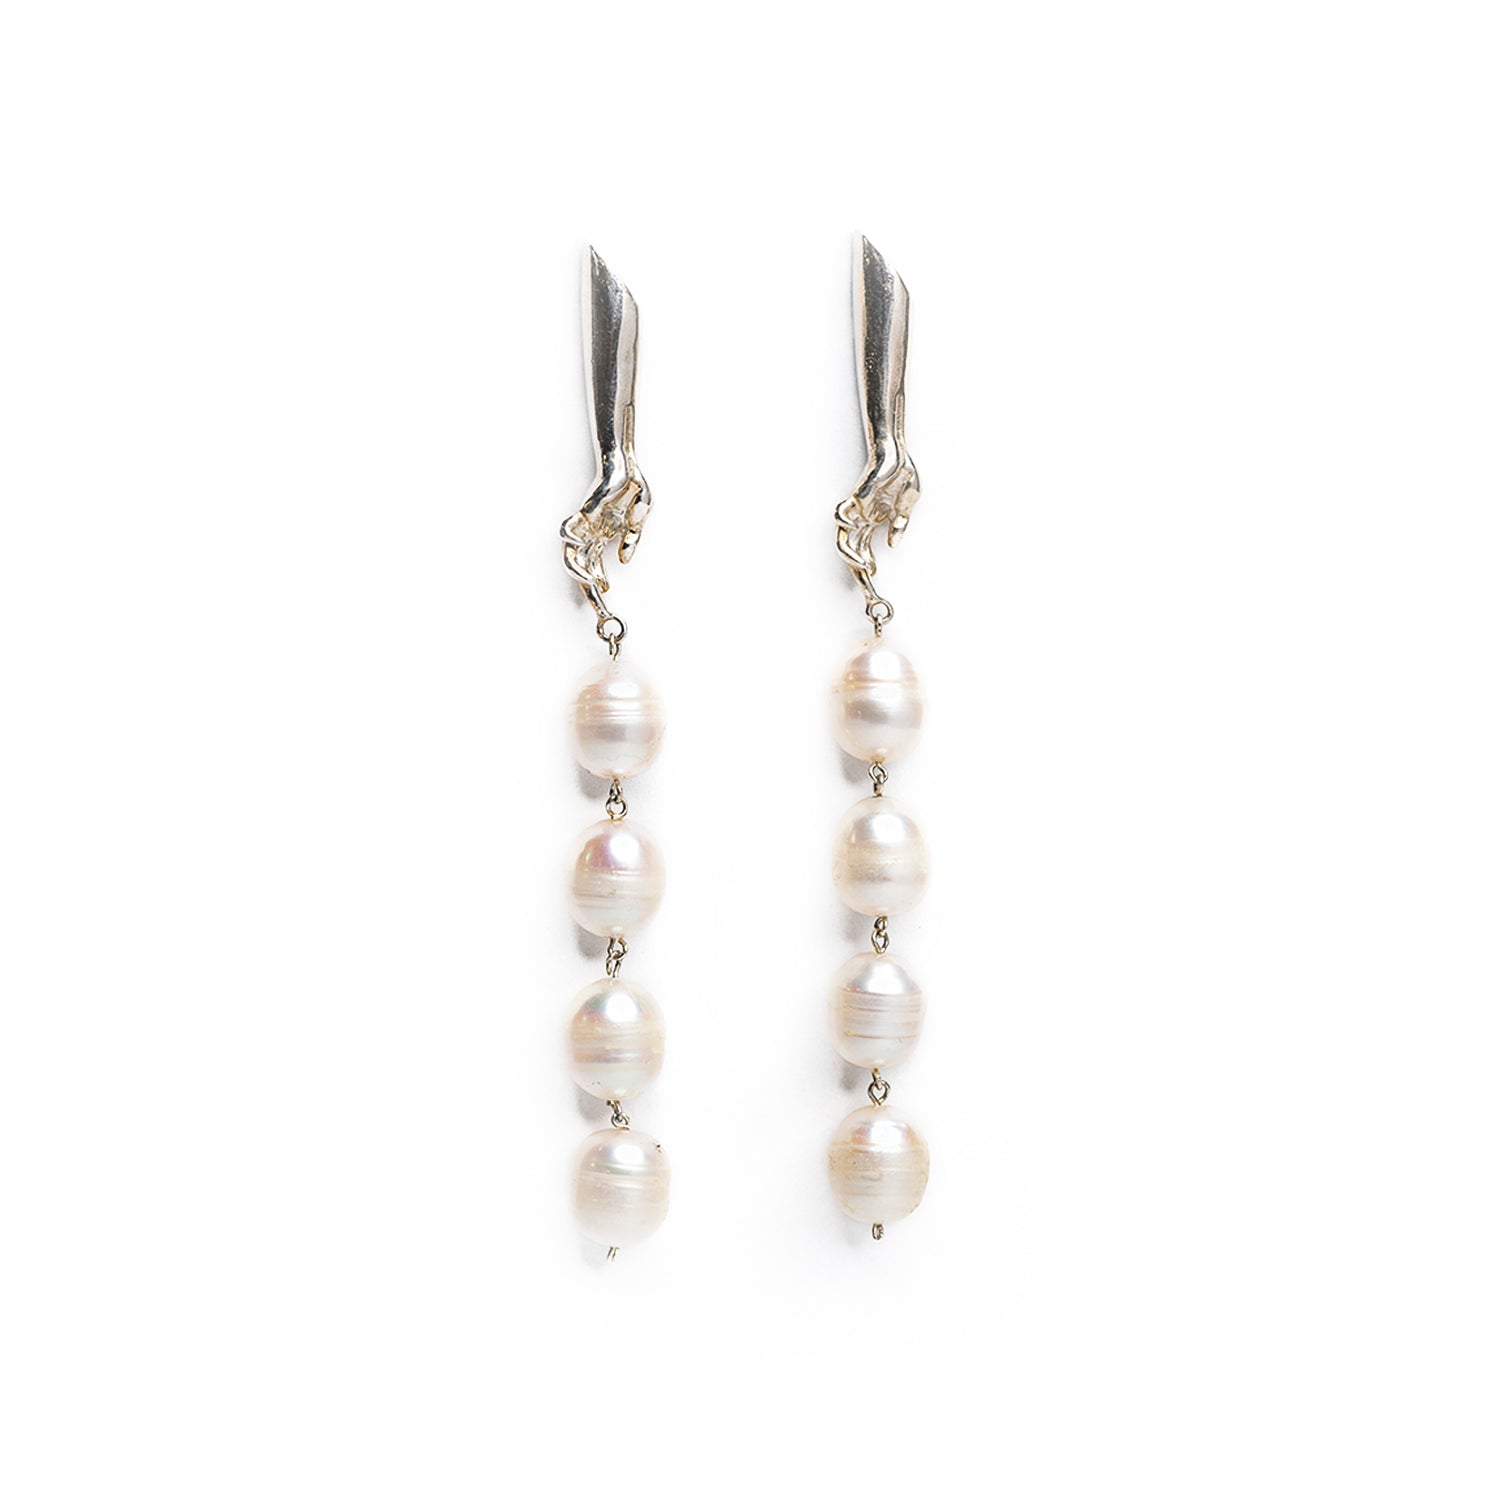 Mie Statement Earrings in Silver and Baroque Pearls